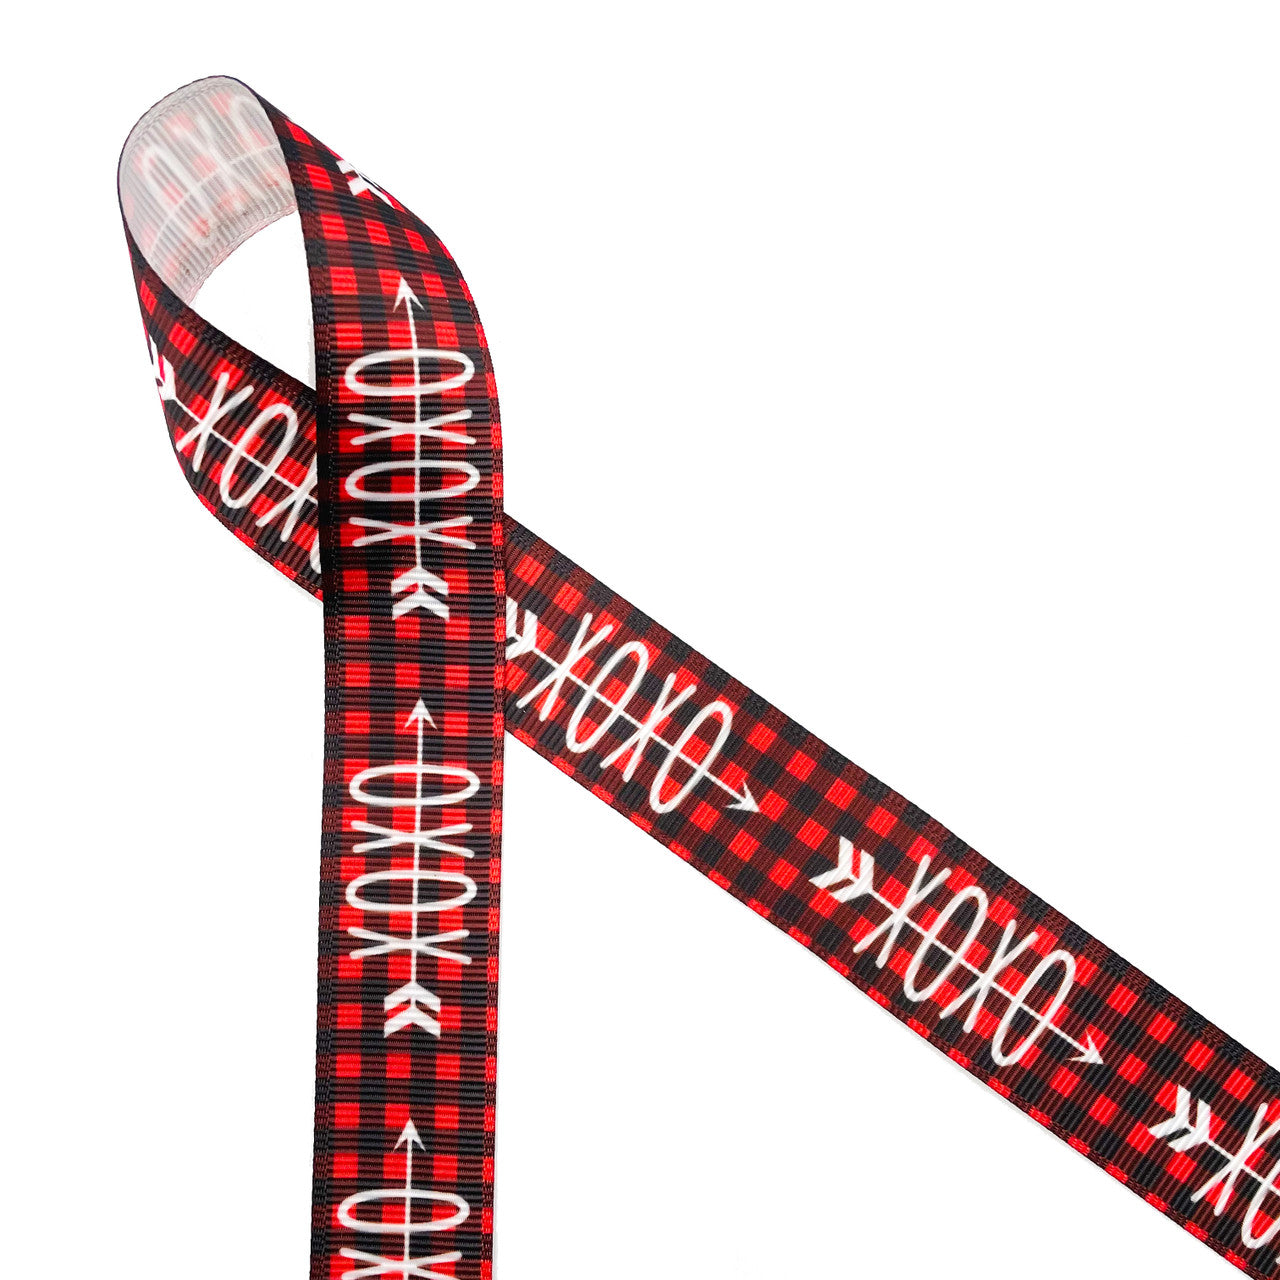 Valentine ribbon with cupids arrow through X's and O's on a red and black buffalo plaid background printed on 7/8" white grosgrain is a fun ribbon for your gentleman Valentine. This is an ideal ribbon for gift wrap, gift baskets, party decor, sweet shops, candy shops, chocolatiers and bakeries. Use this ribbon on all your creative crafts including wreath making, sewing, quilting, and scrap booking. All our ribbon is designed and printed in the USA